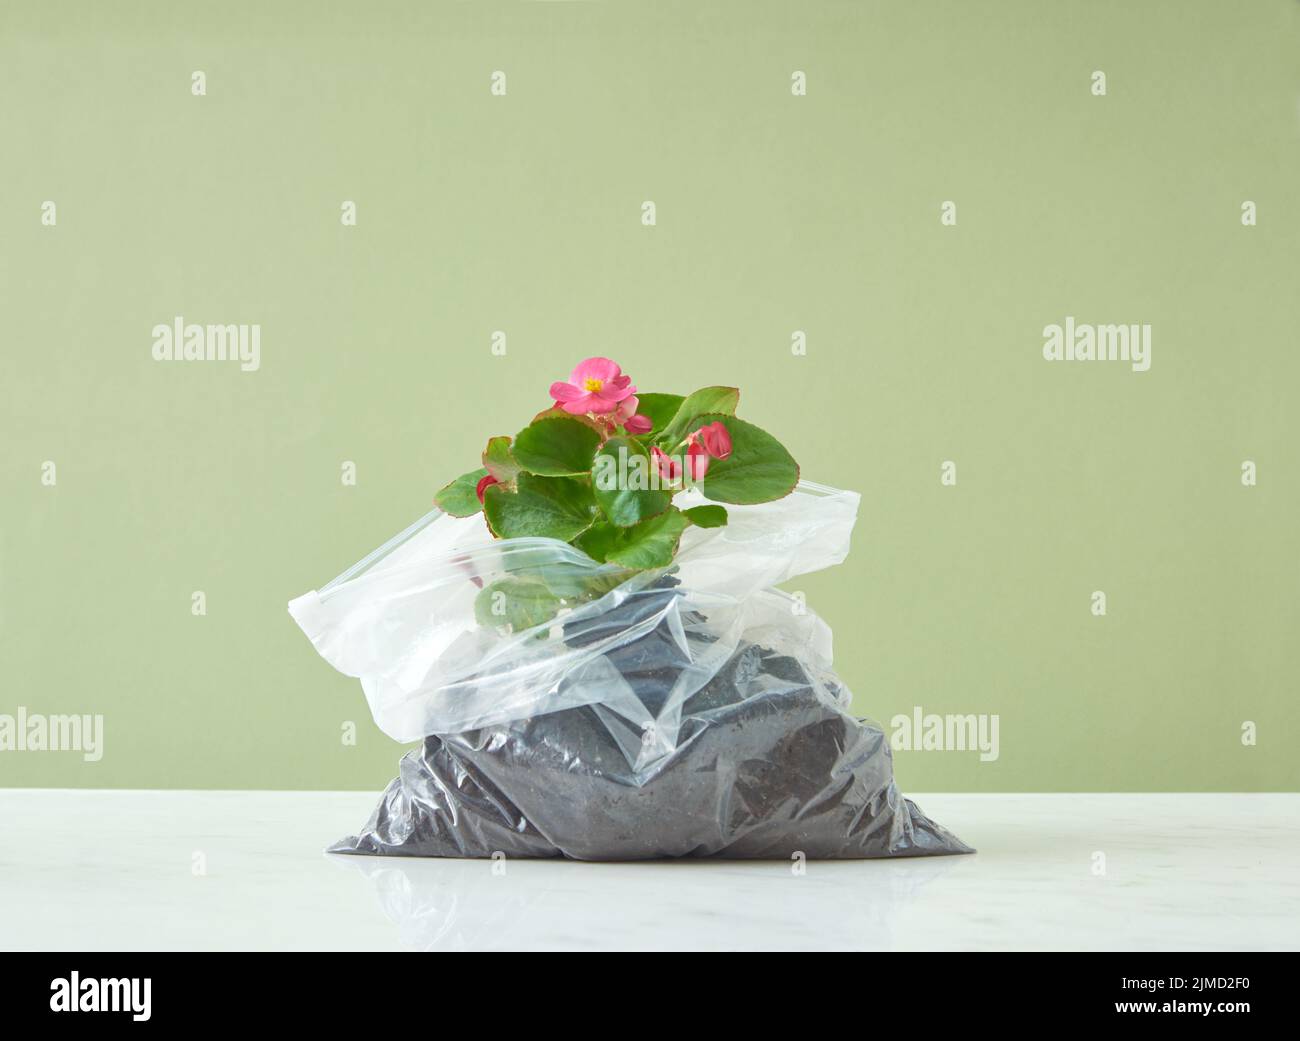 Blooming evergreen houseplant in a plastic bag on a duotone background. Stock Photo